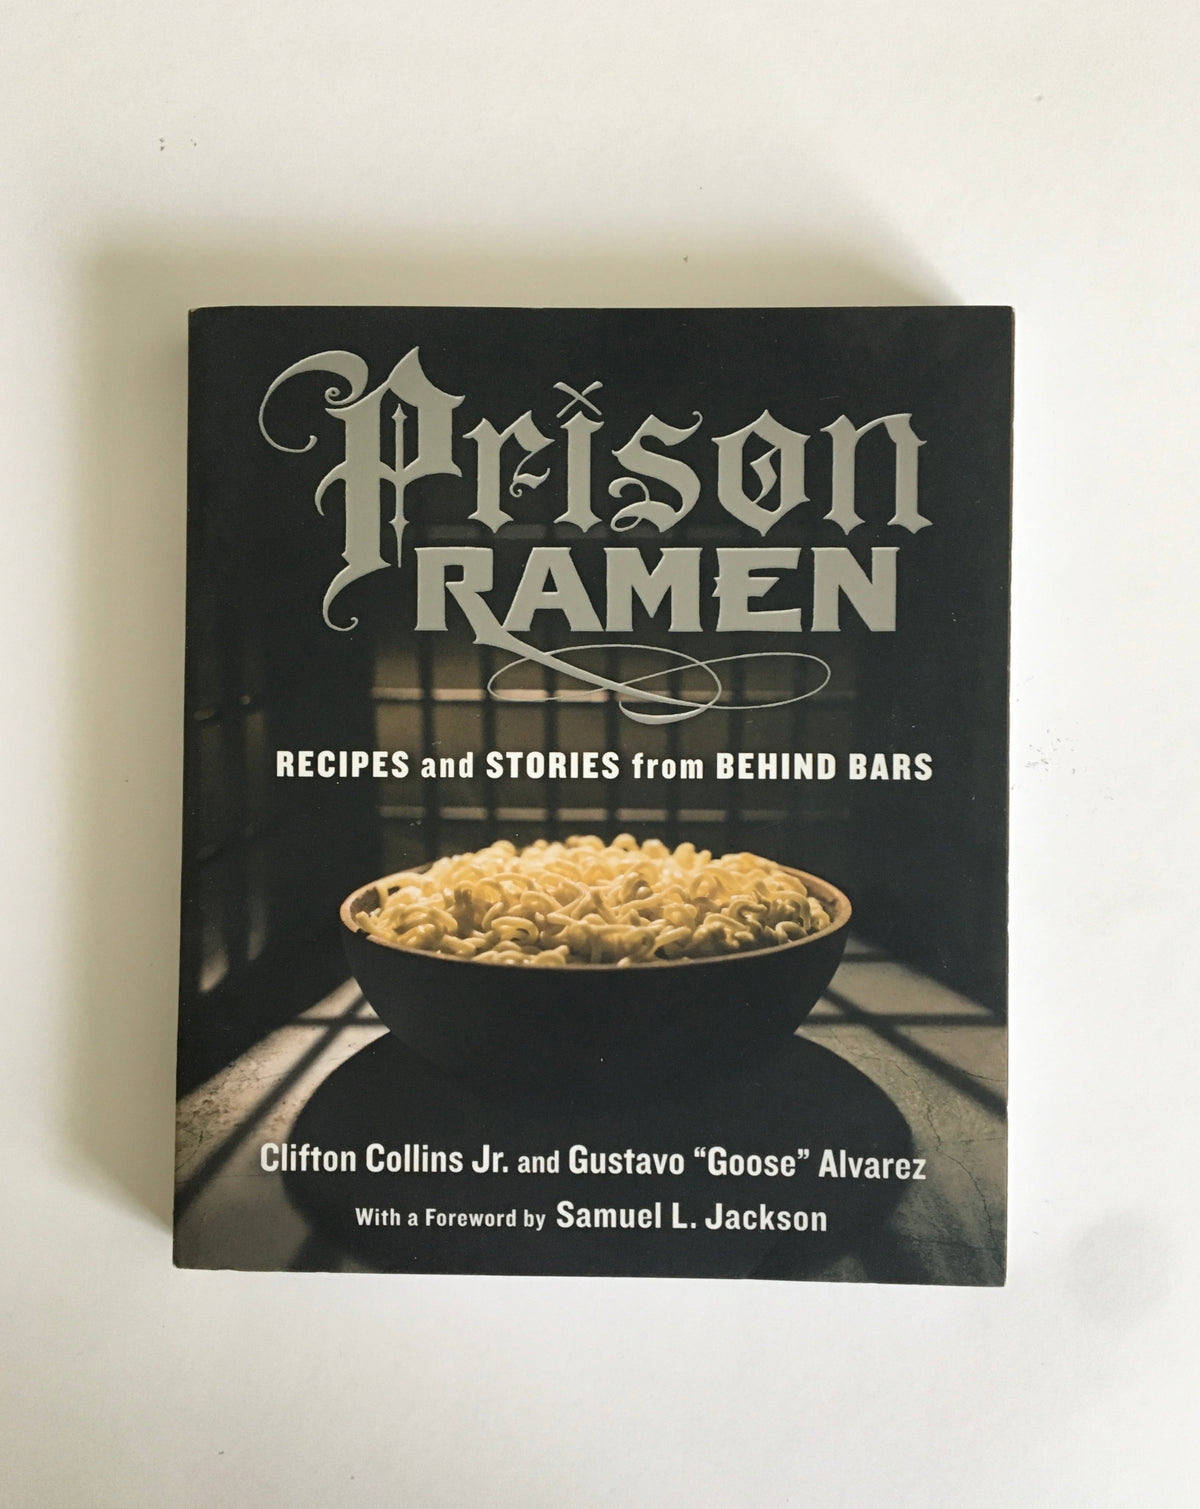 Prison Ramen: Recipes and Stories from Behind Bars by Collins and Alvarez